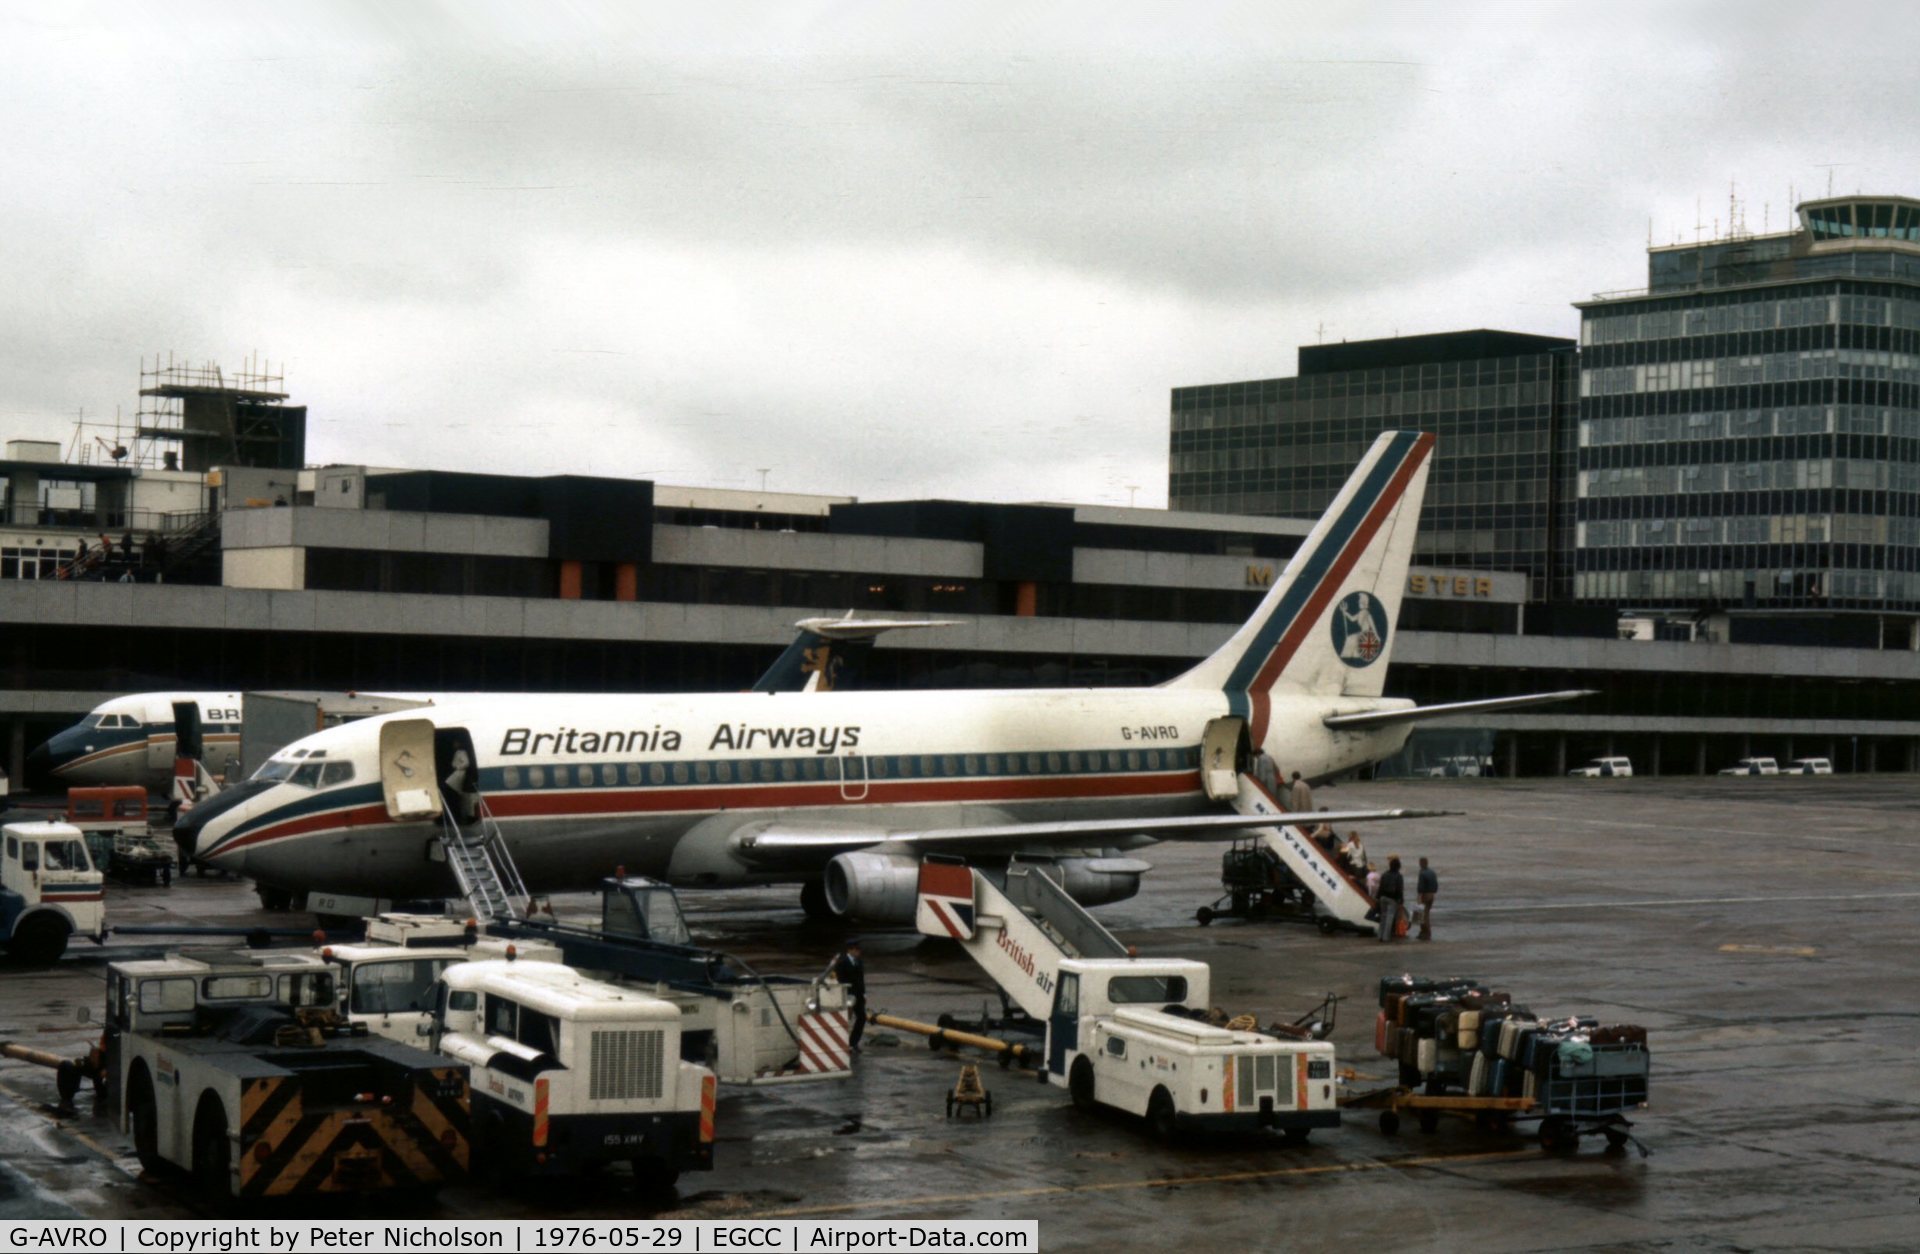 G-AVRO, 1969 Boeing 737-204 C/N 19712, In service with Britannia Airways as seen in the summer of 1976 at Manchester.